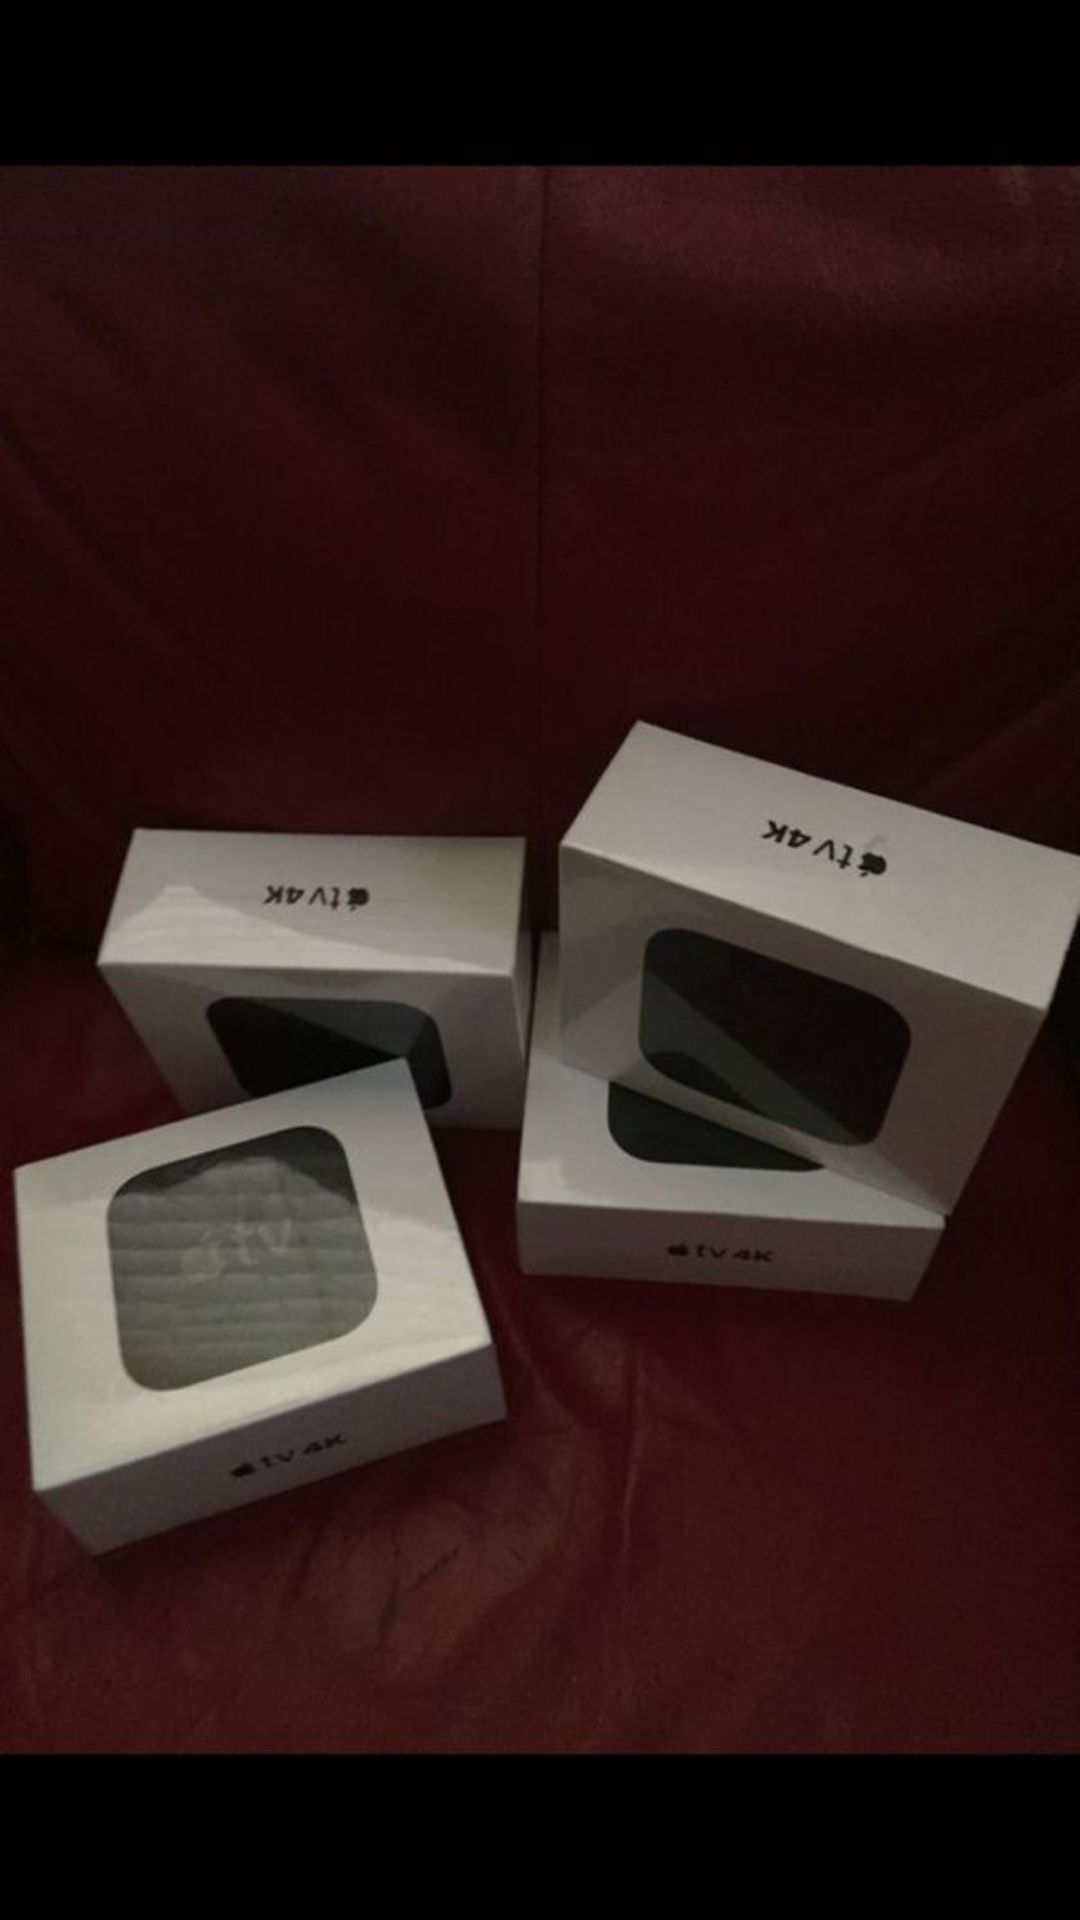 Brand new 4K Apple TV is out of the box $125